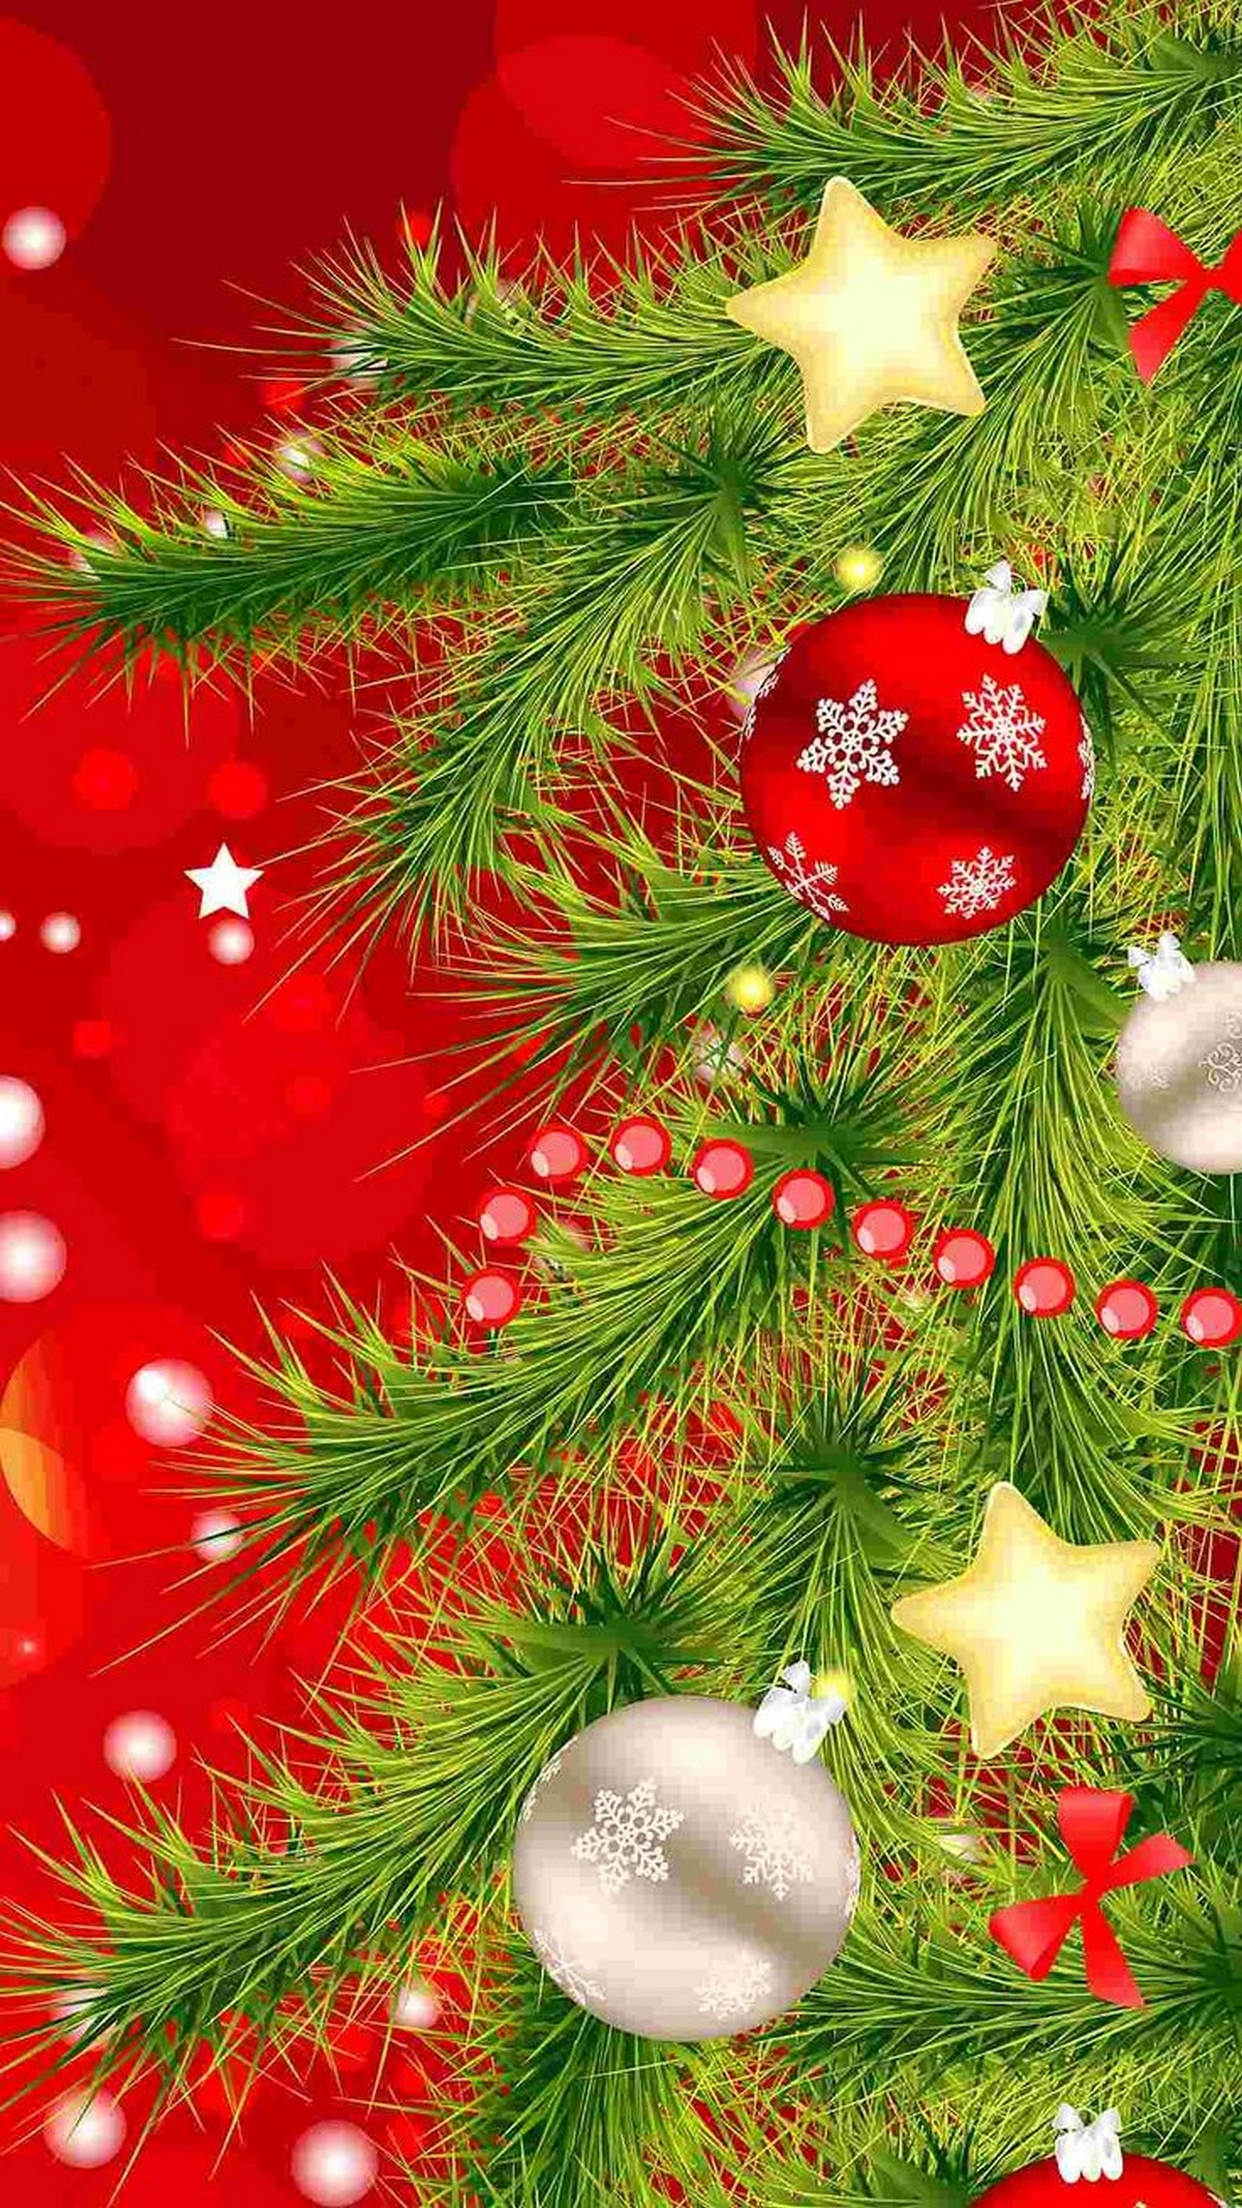 30 Christmas Wallpapers for iPhones